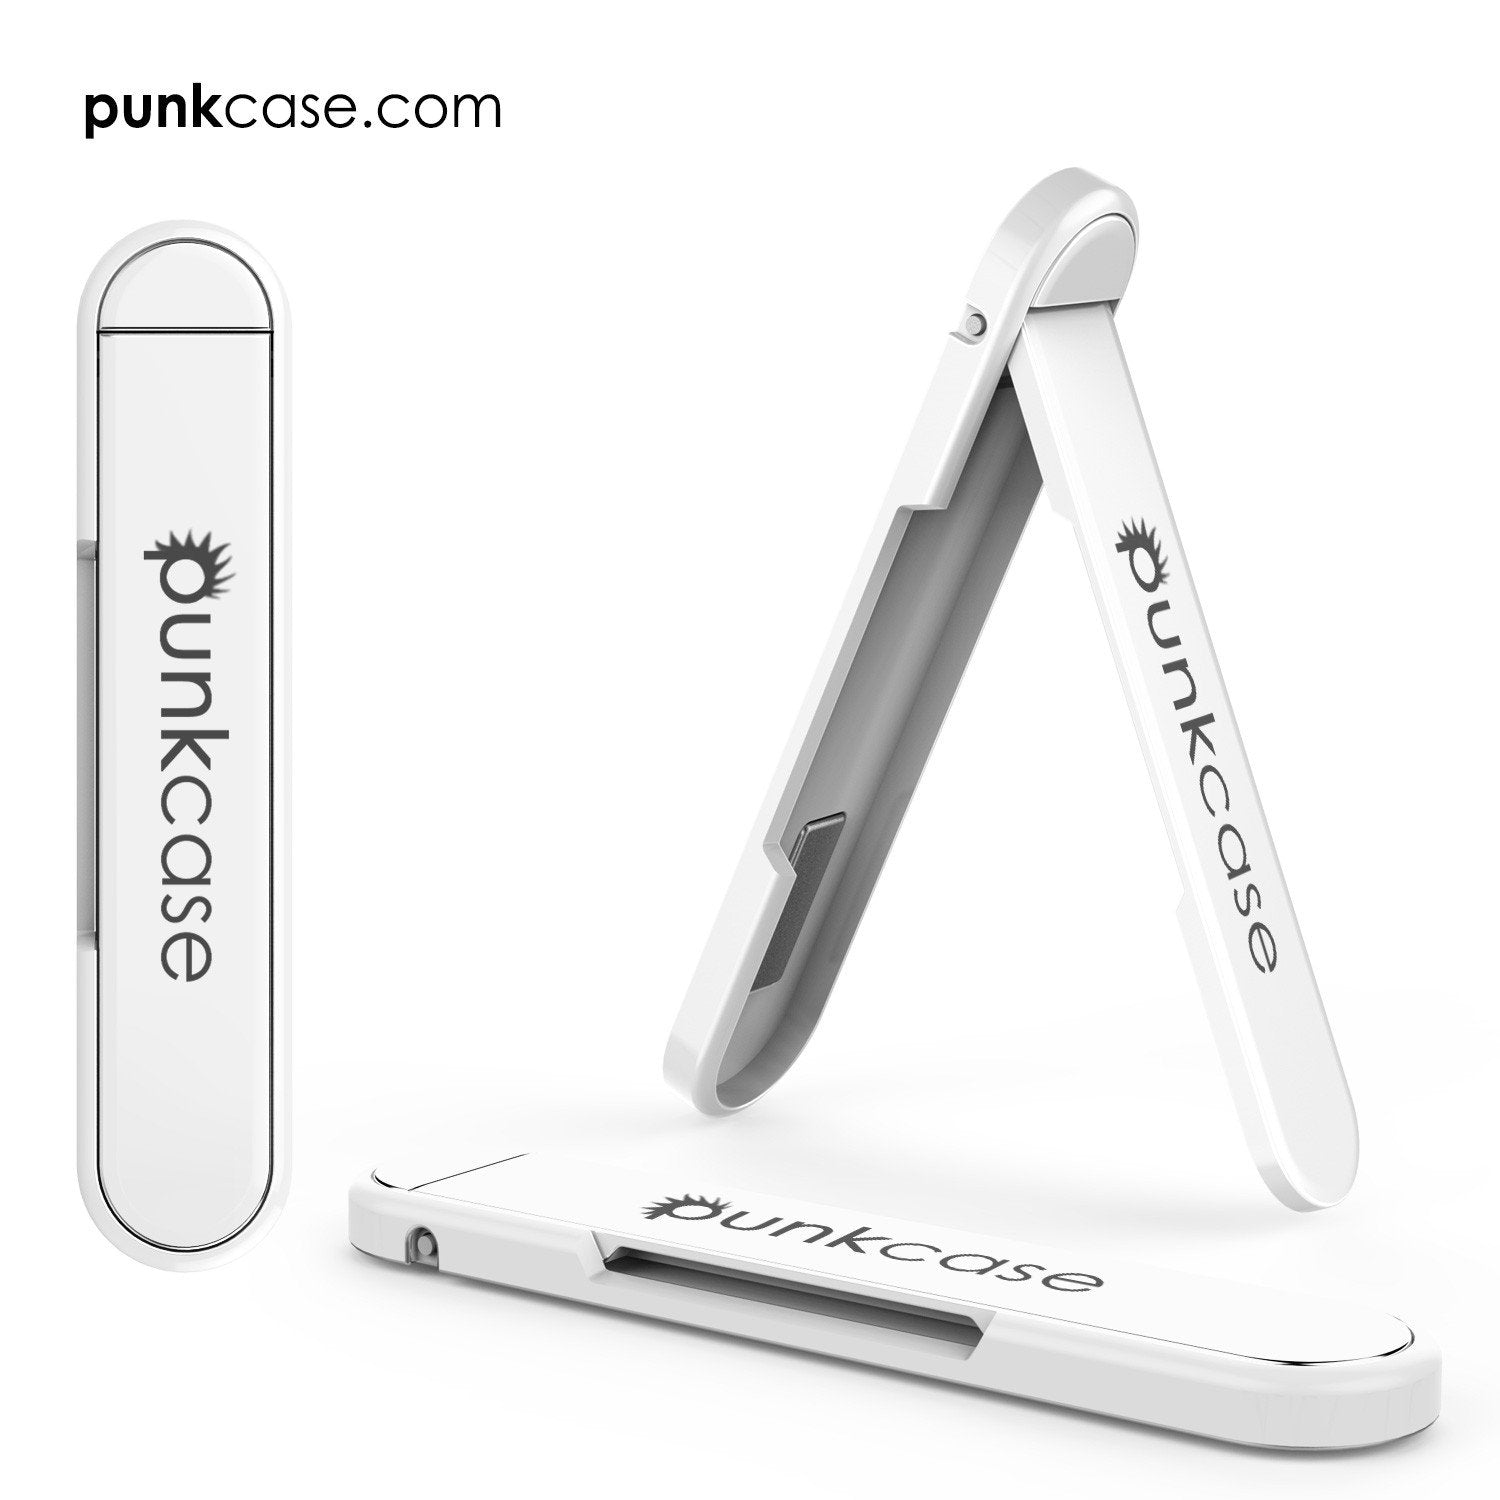 PUNKCASE FlickStick Universal Cell Phone Kickstand for all Mobile Phones & Cases with Flat Backs, One Finger Operation (White)